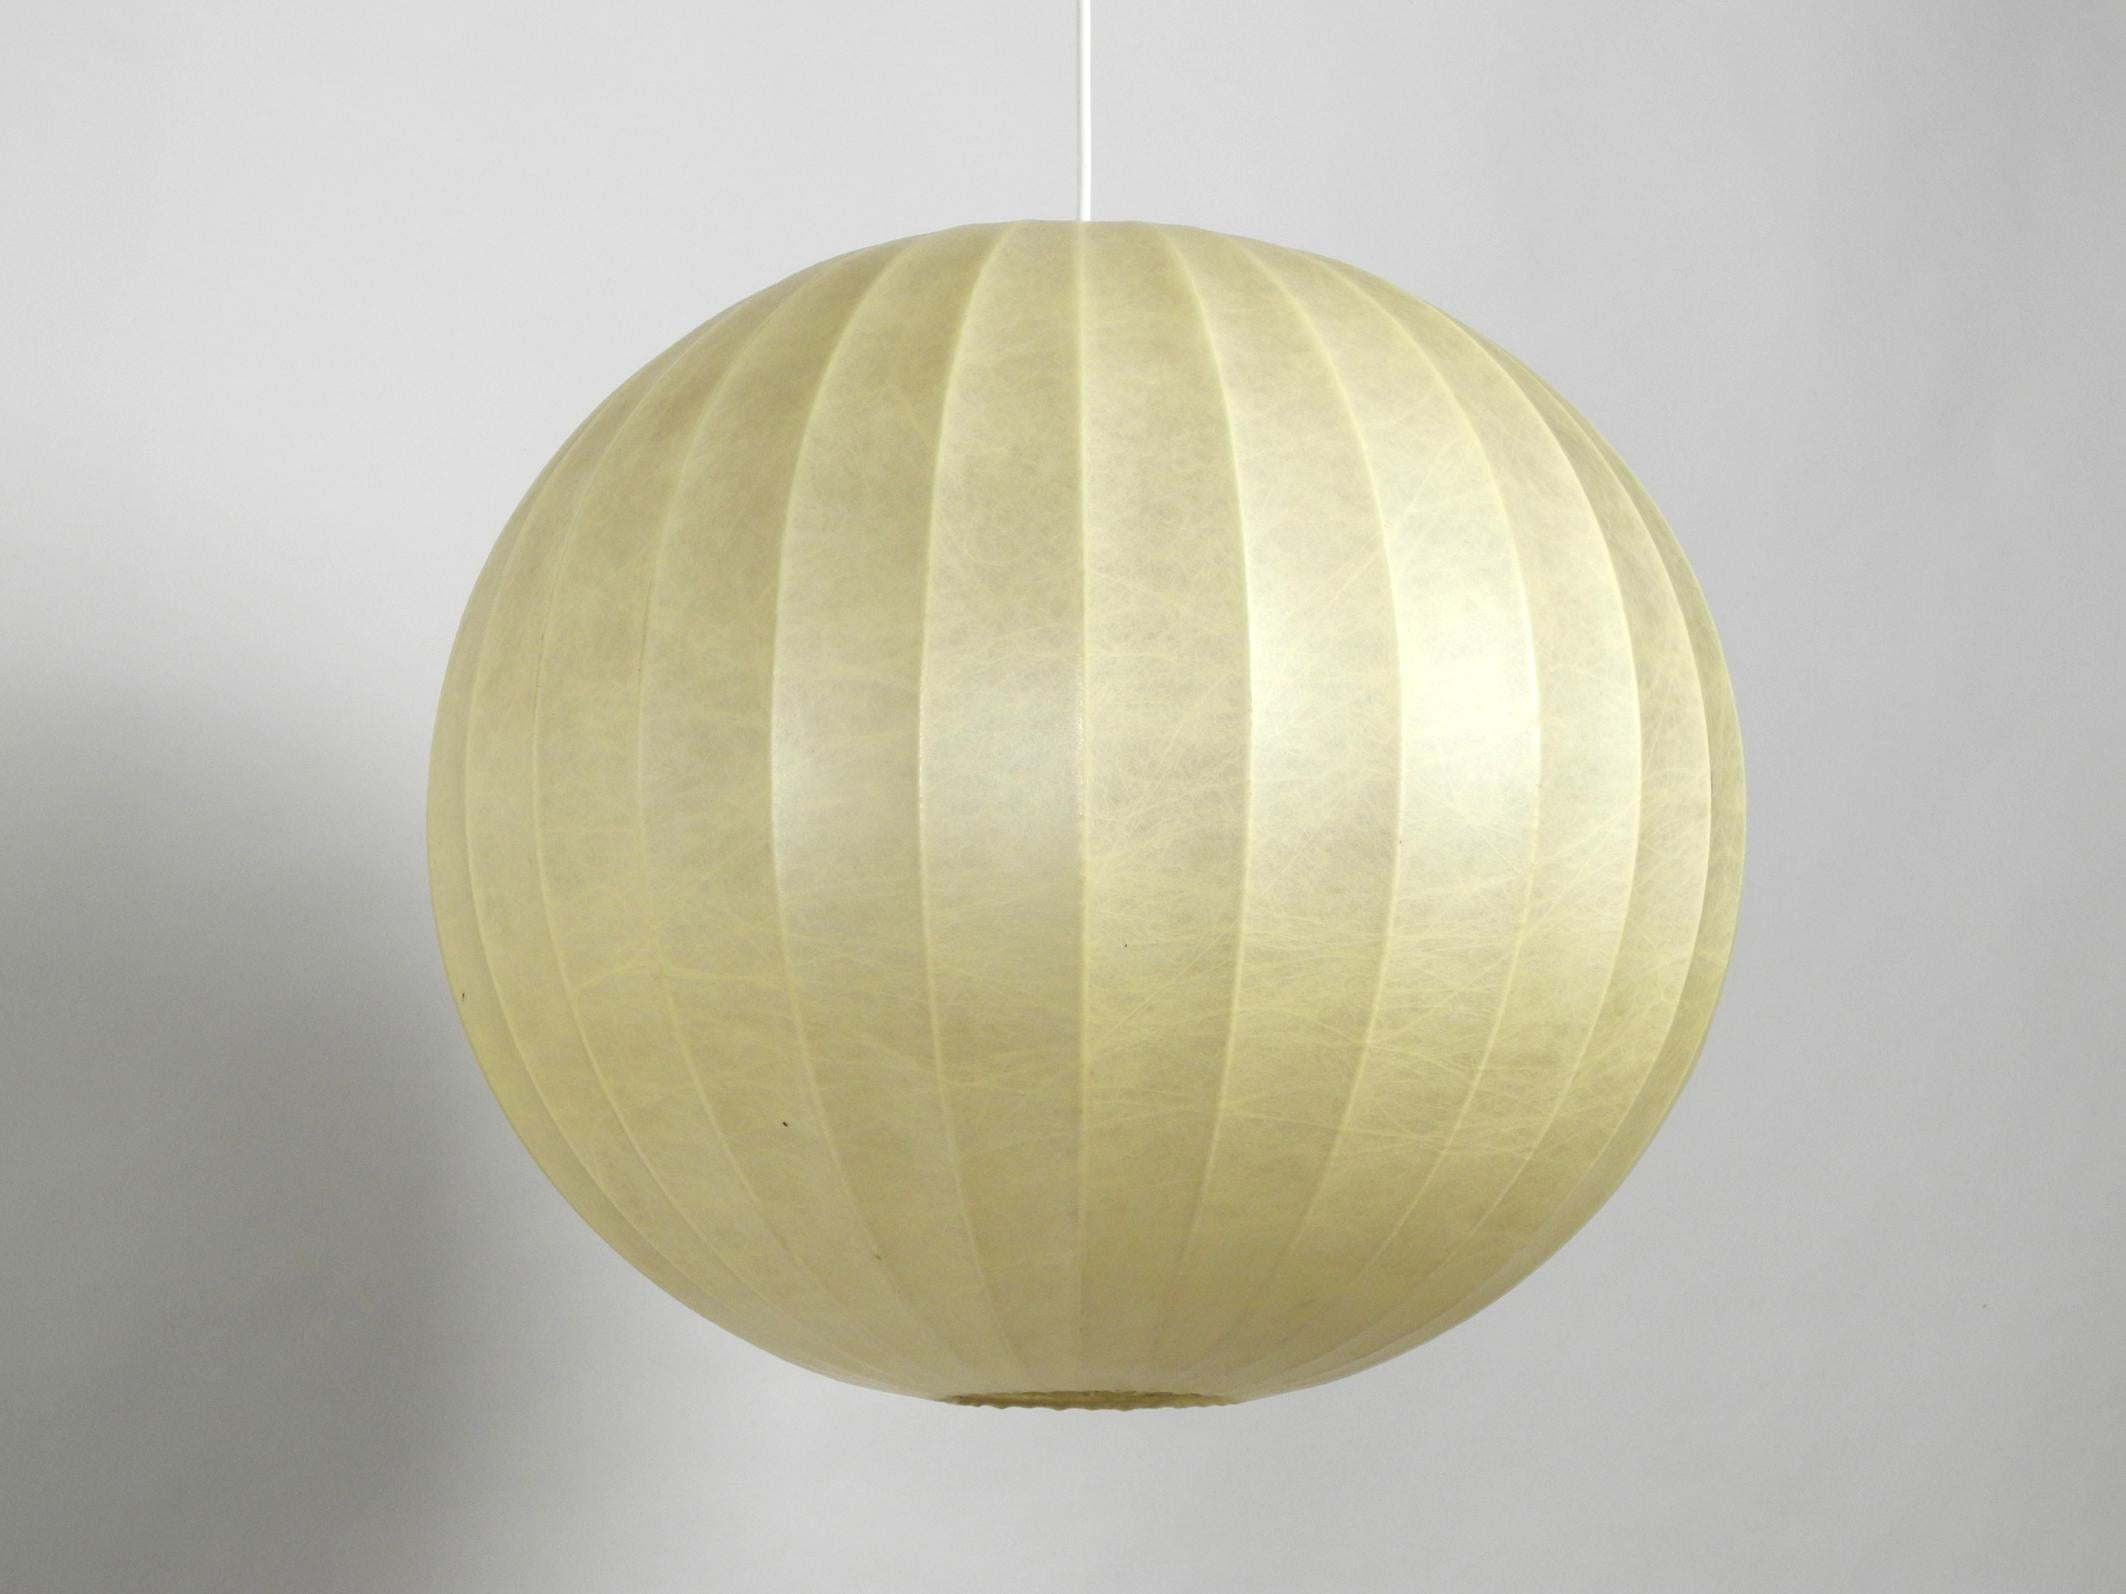 Beautiful 1960s extra extra large cocoon big ball pendant lamp in very good original vintage condition.
Great Minimalist design. Creates a very pleasant warm light.
The shade has no damages. No holes or cracks.
With one E27 original brass socket